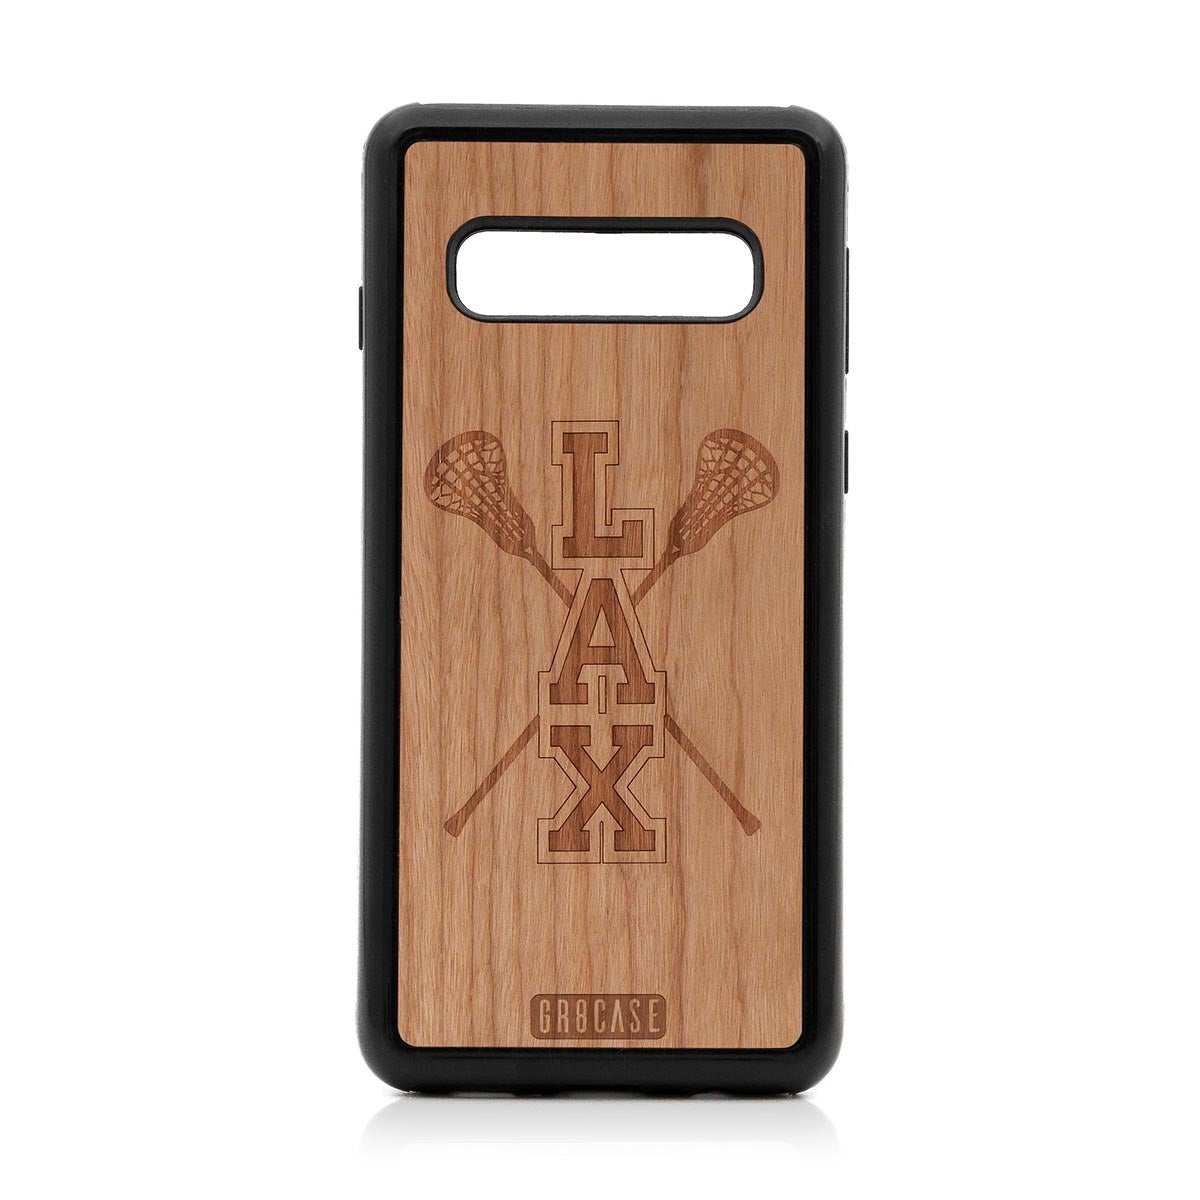 Lacrosse (LAX) Sticks Design Wood Case For Samsung Galaxy S10 by GR8CASE